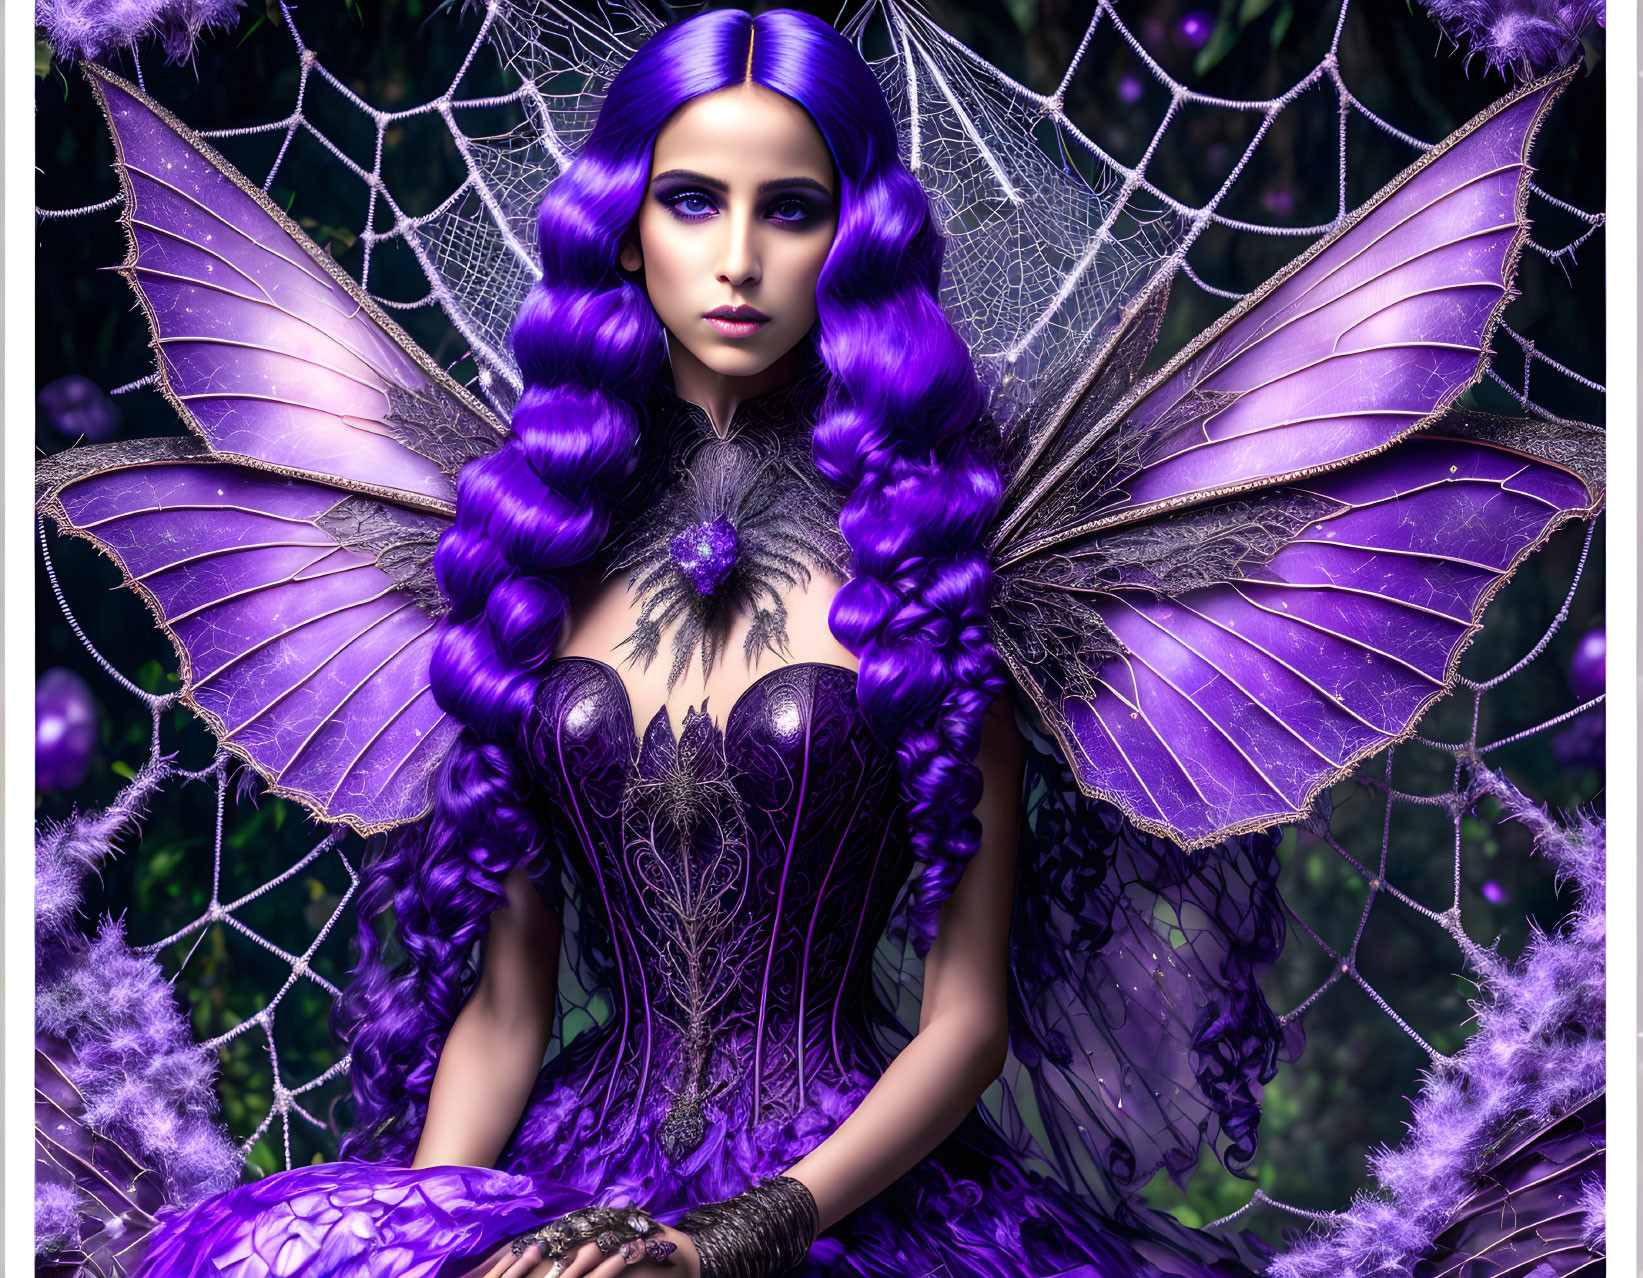 Woman with Purple Hair and Butterfly Wings in Gothic Dress Surrounded by Spider Webs and Violet Foli